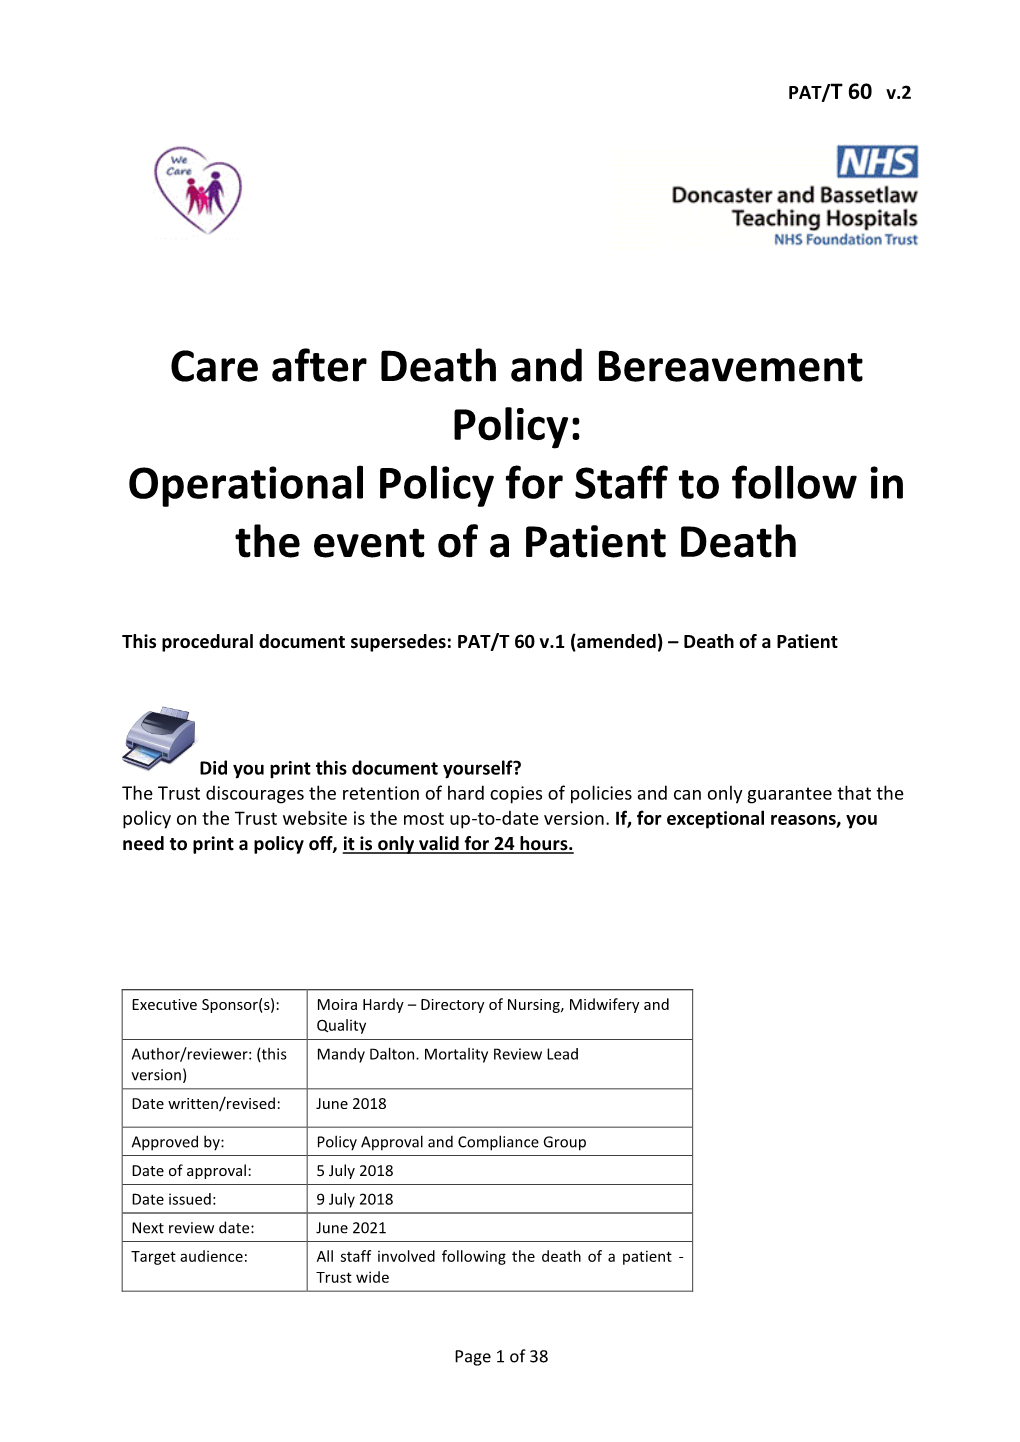 Care After Death and Bereavement Policy: Operational Policy for Staff to Follow in the Event of a Patient Death